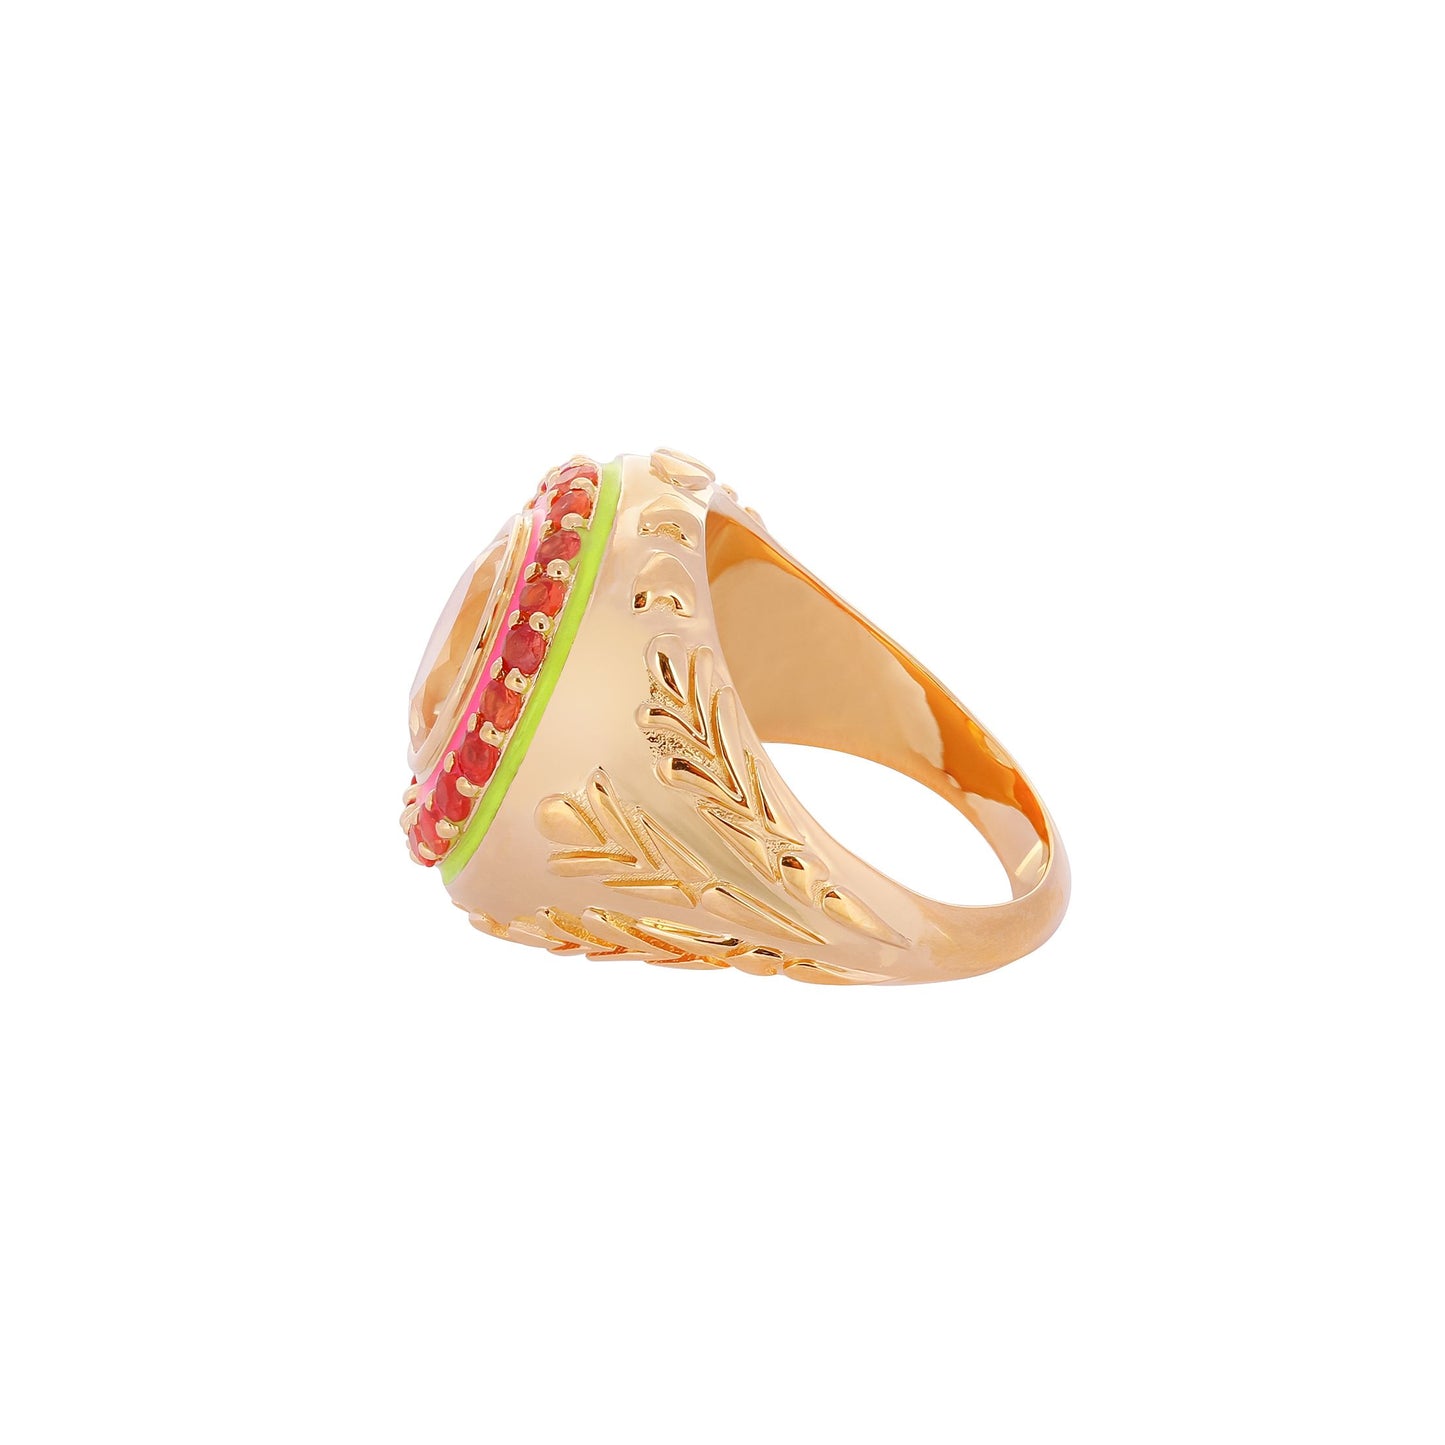 image of statement ring in orange side view on white background